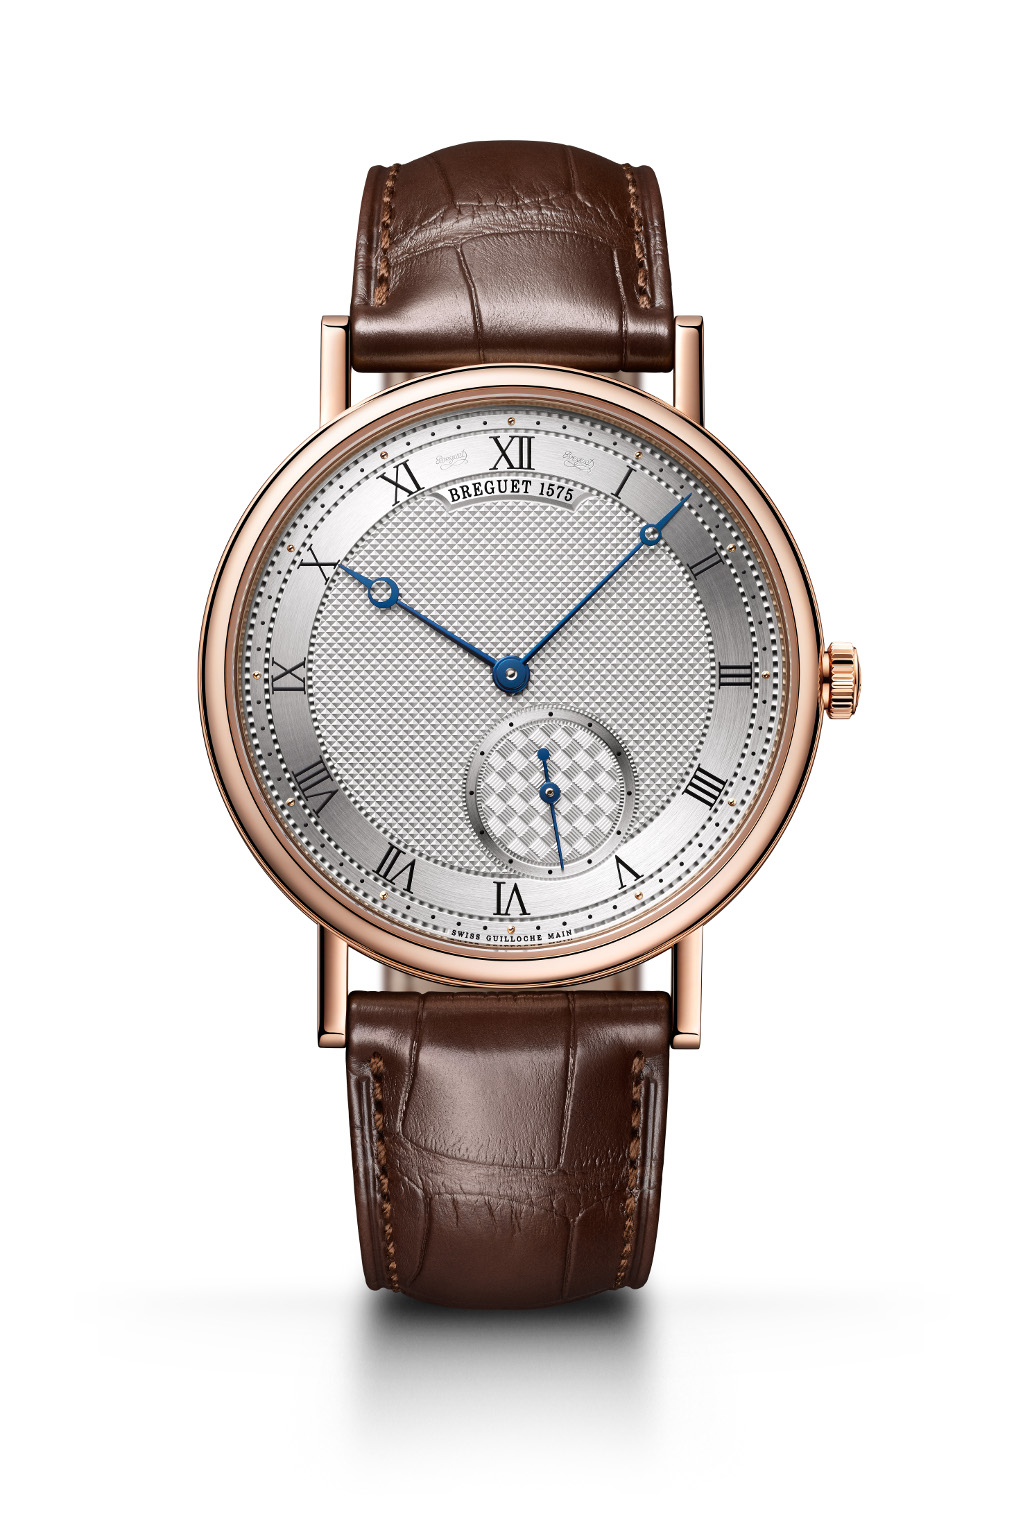 The new Breguet Classique 7147. Did someone mentioned that simplicity is the ultimate sophistication? 